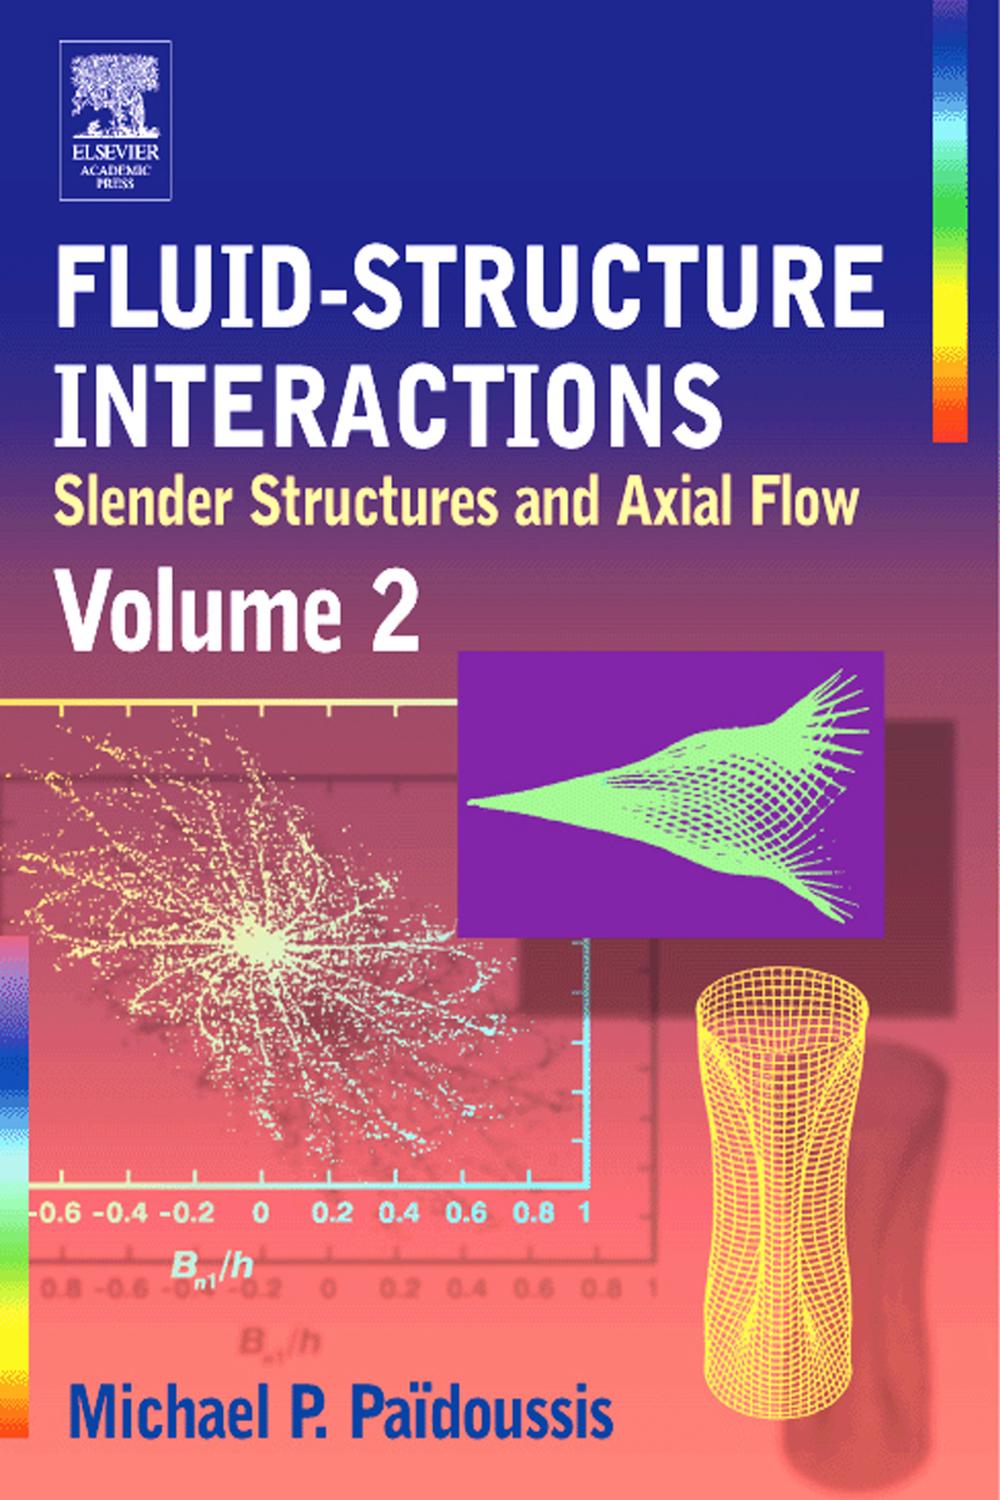 Fluid-Structure Interactions, Volume 2 - Michael P. Paidoussis